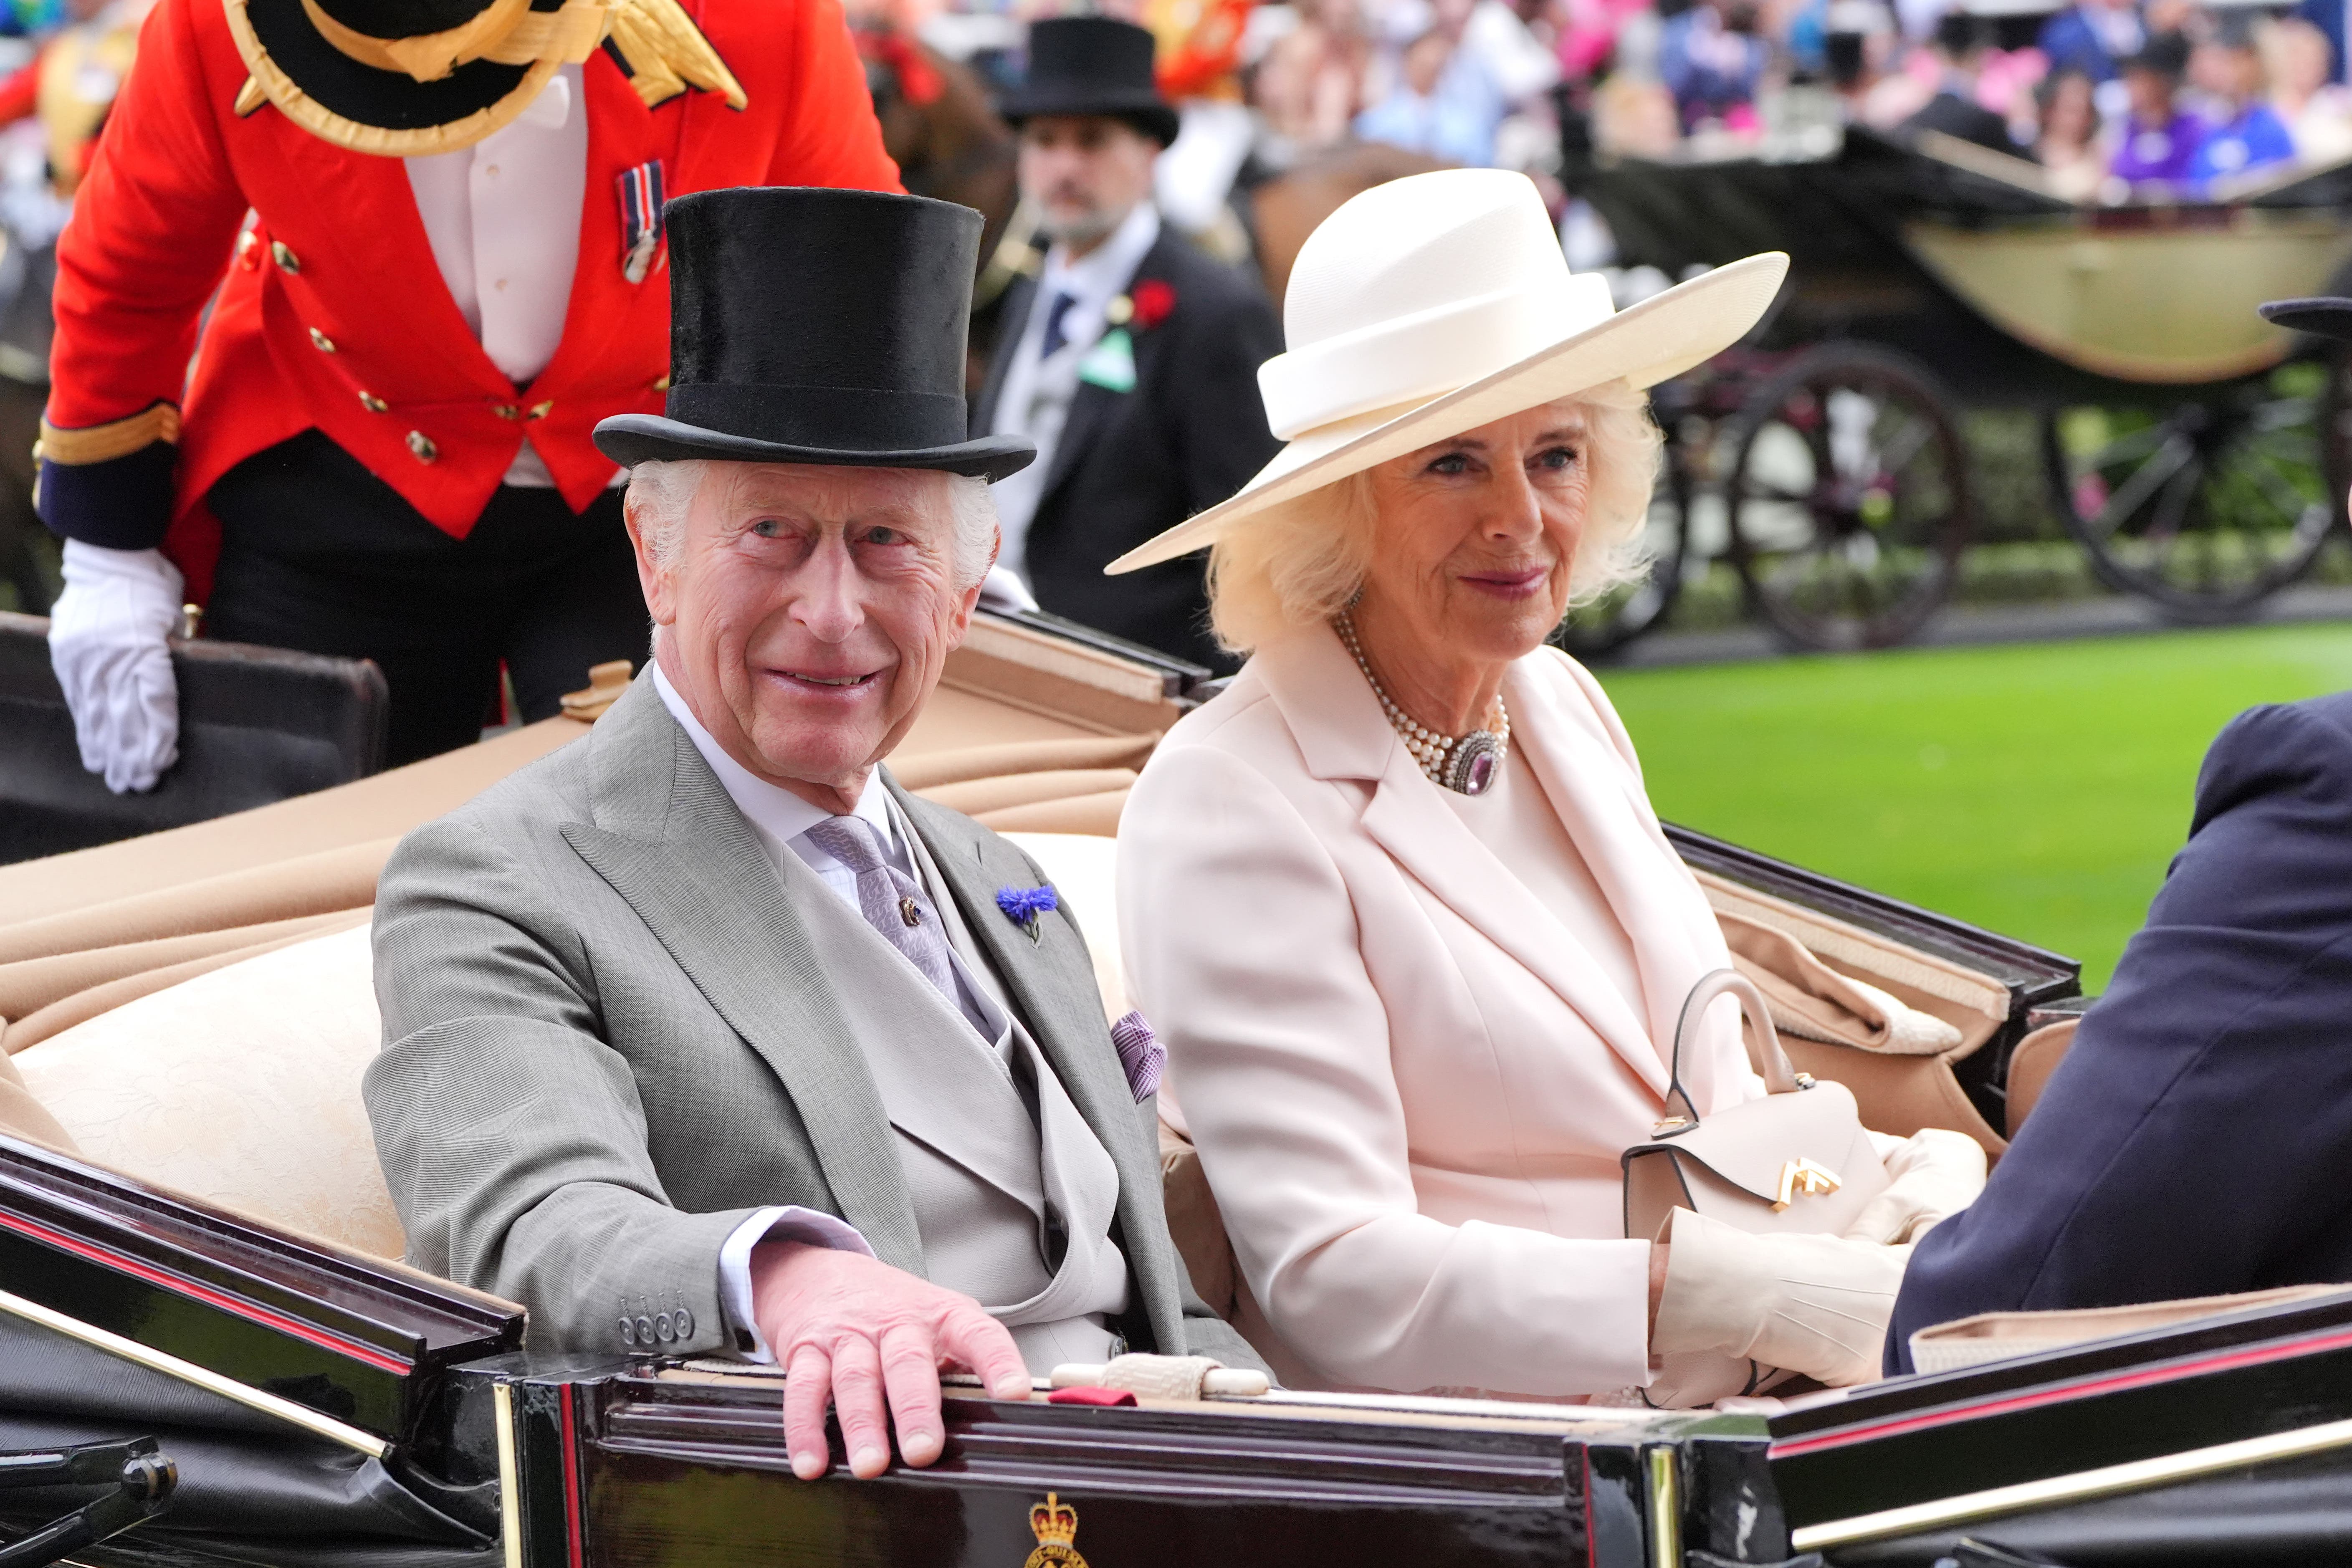 The King and Queen arrive for day five of Royal Ascot (Yui Mok/PA)